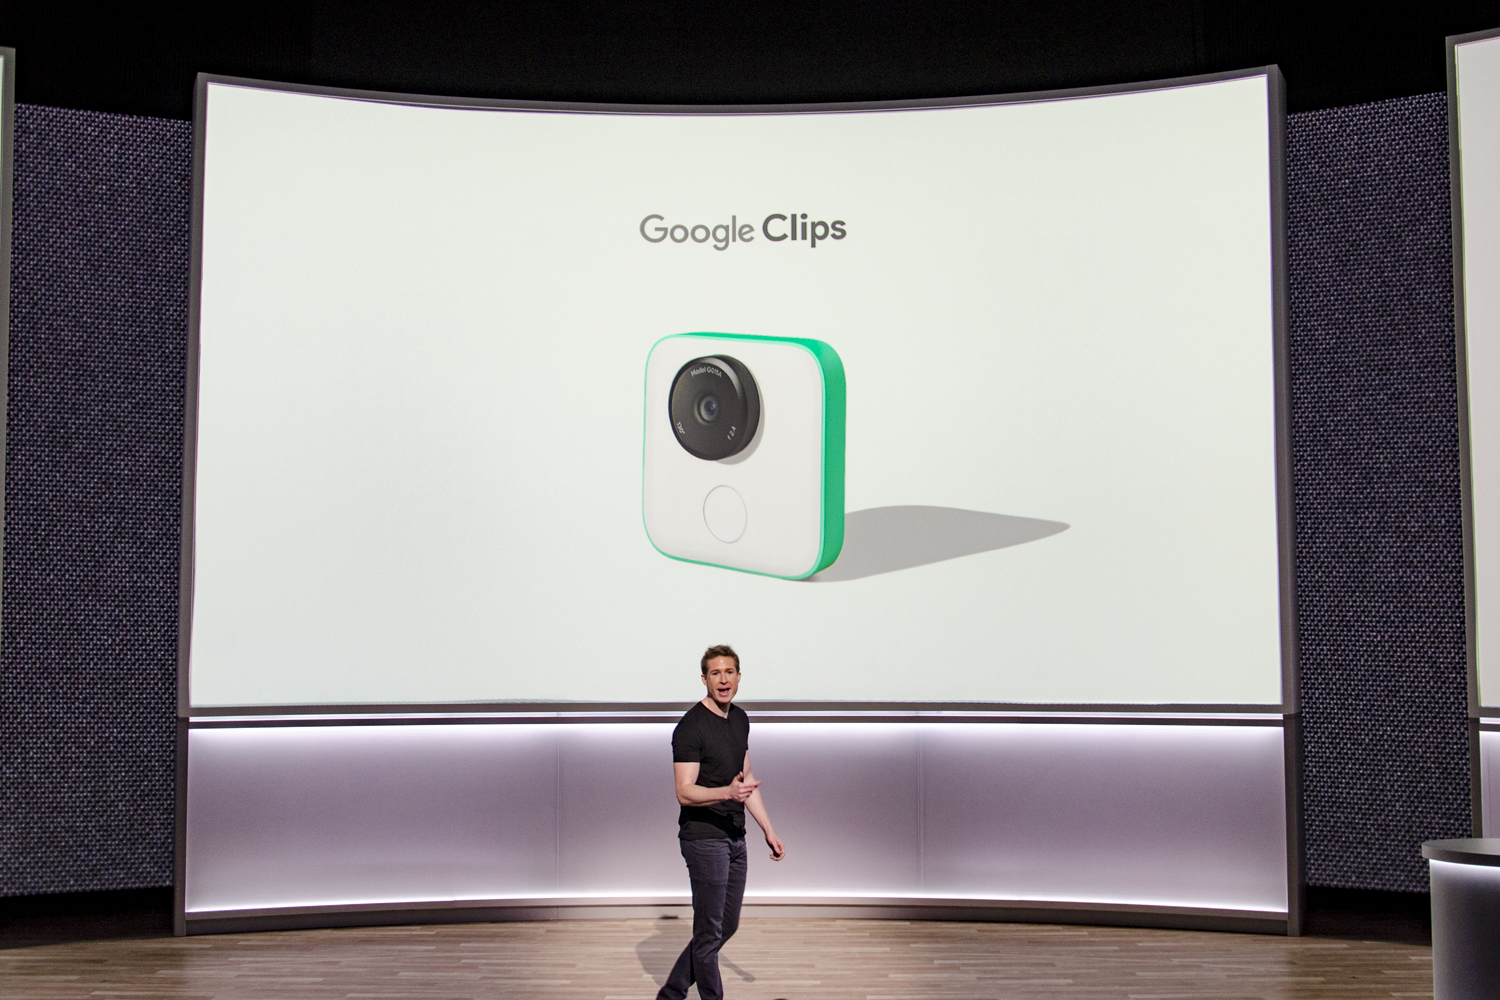 Google Clips on stage at October 4 event